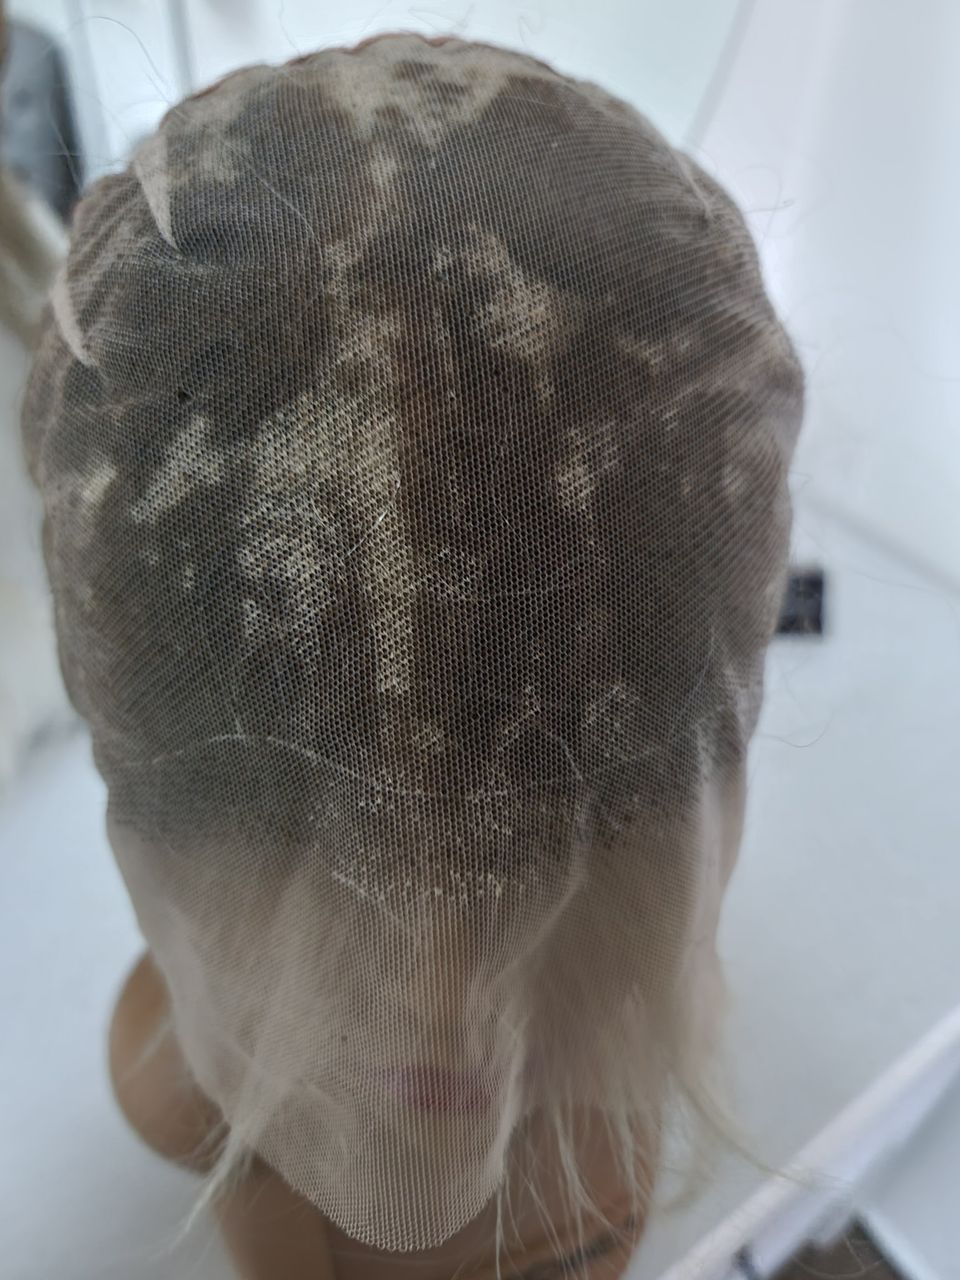 Pre-Colored Full Lace Wig Unit. Light Blonde #60 with Medium Blonde #8 Root